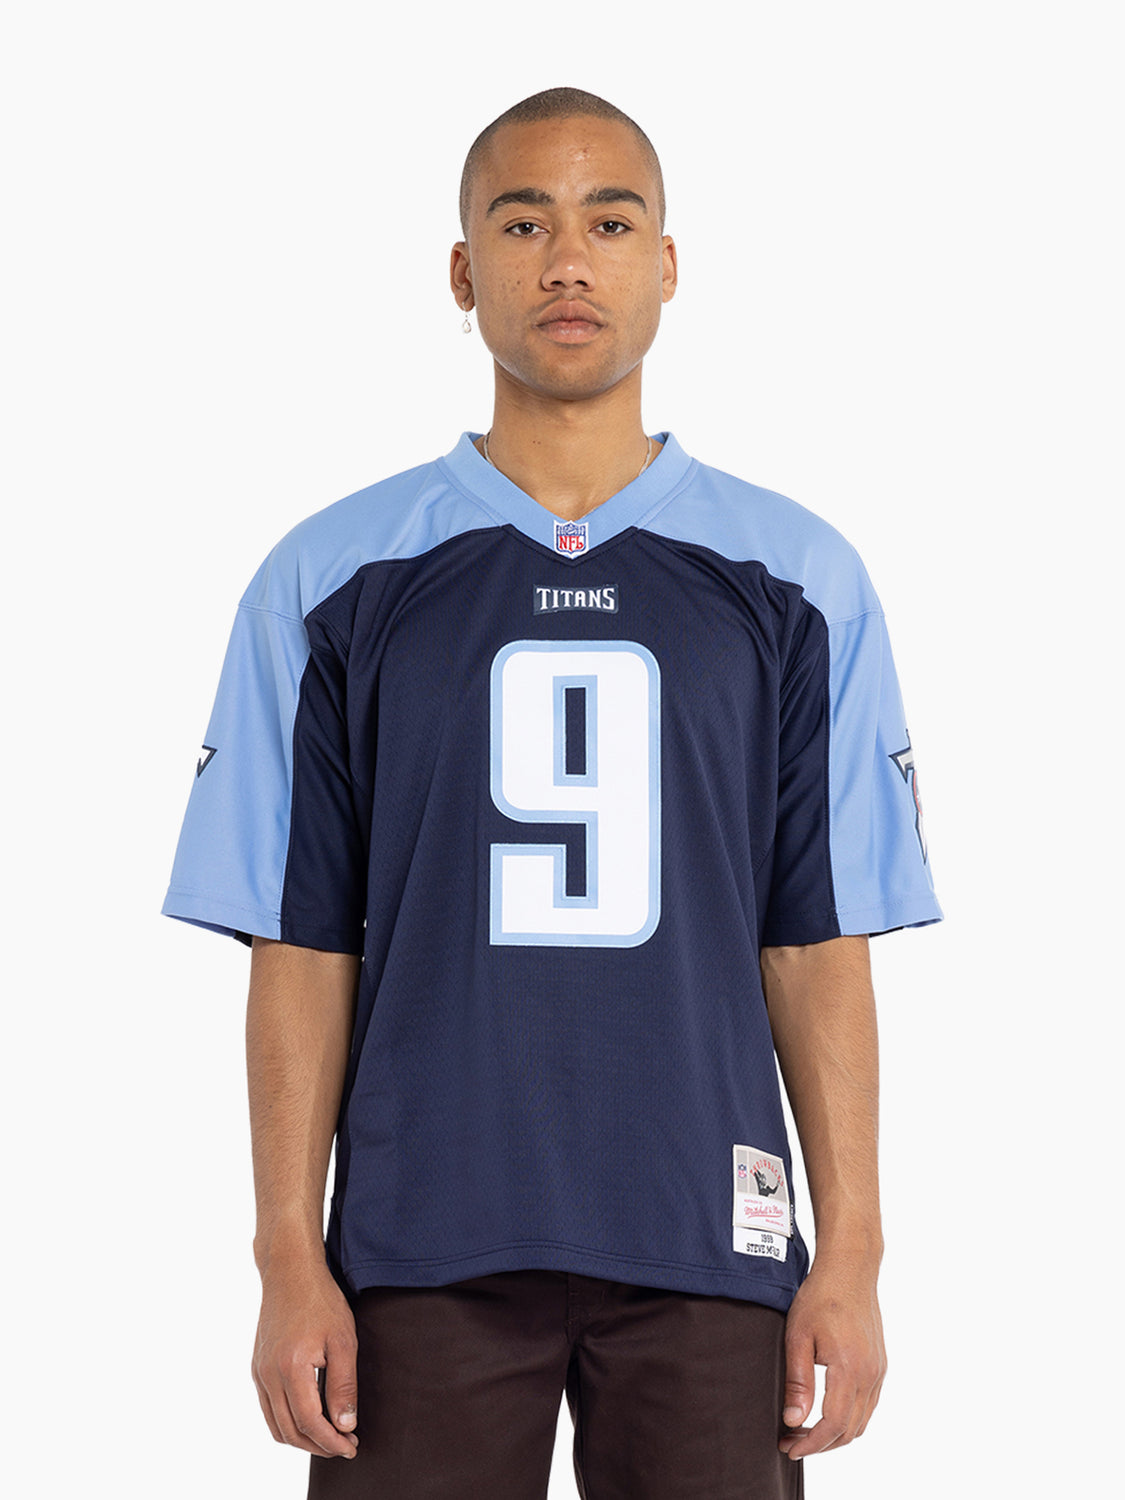 Tennessee Titans Throwback Apparel and Jerseys from Mitchell & Ness  Mitchell & Ness Nostalgia Co.